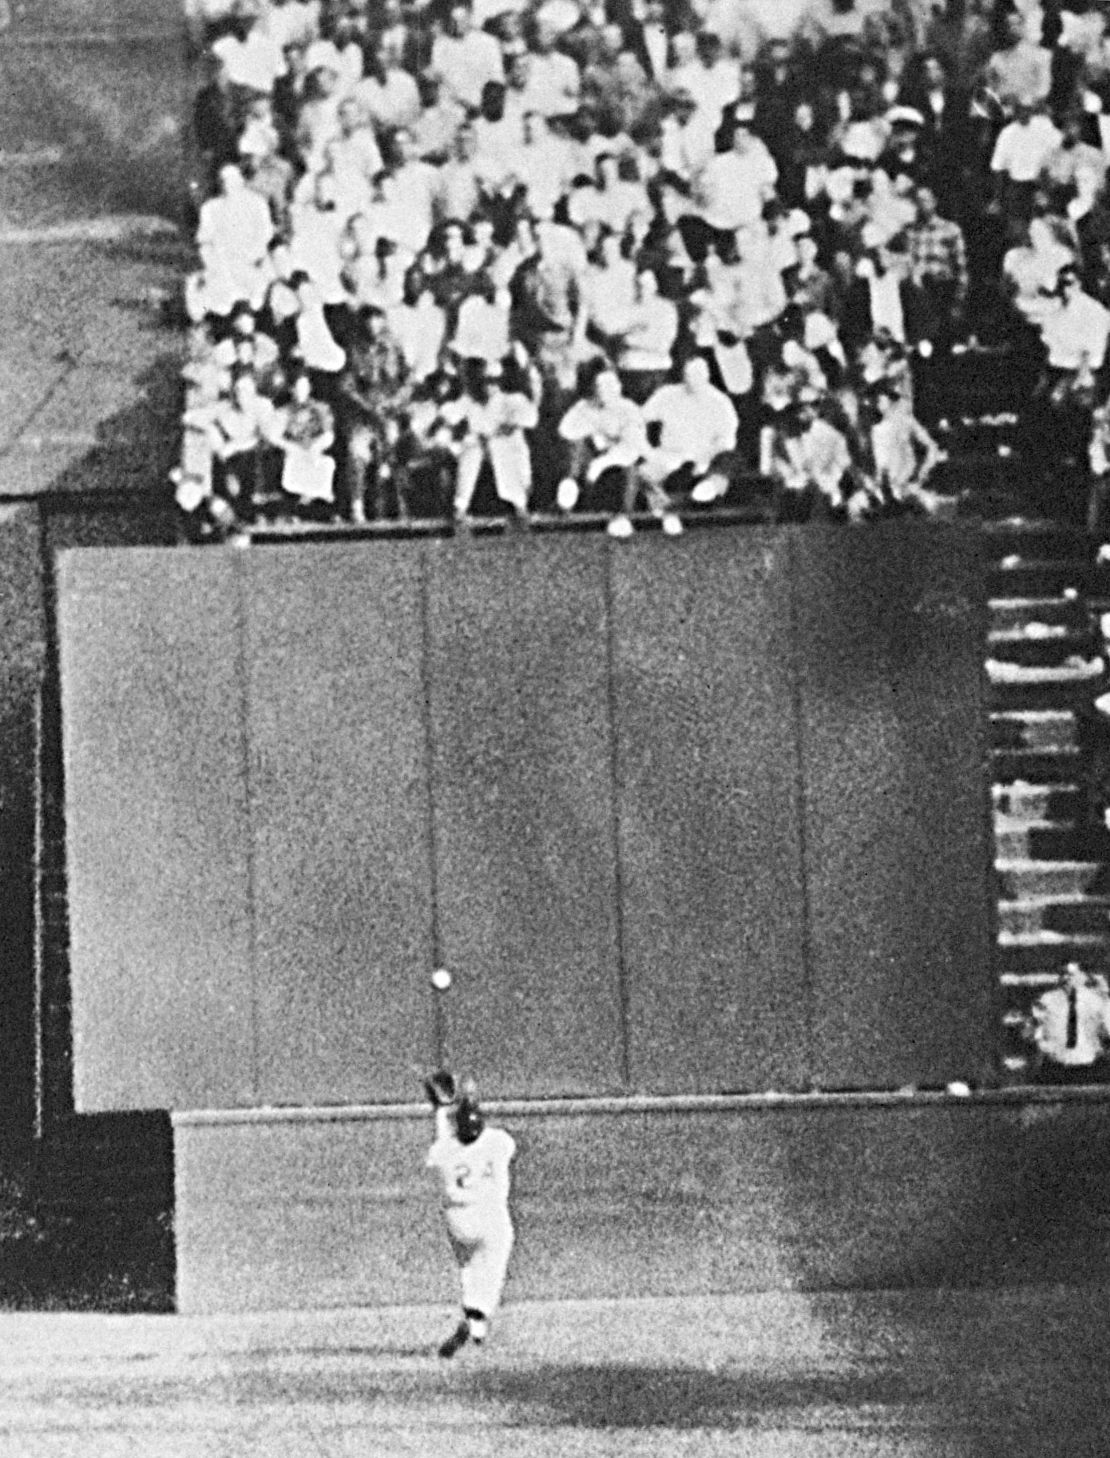 Mays, with his back to the plate, gets under a 450-foot blast off the bat of Cleveland Indians first baseman Vic Wertz to pull the ball down in front of the bleachers wall in the eighth inning of Game 1 of the World Series at the Polo Grounds in New York on September 29, 1954.